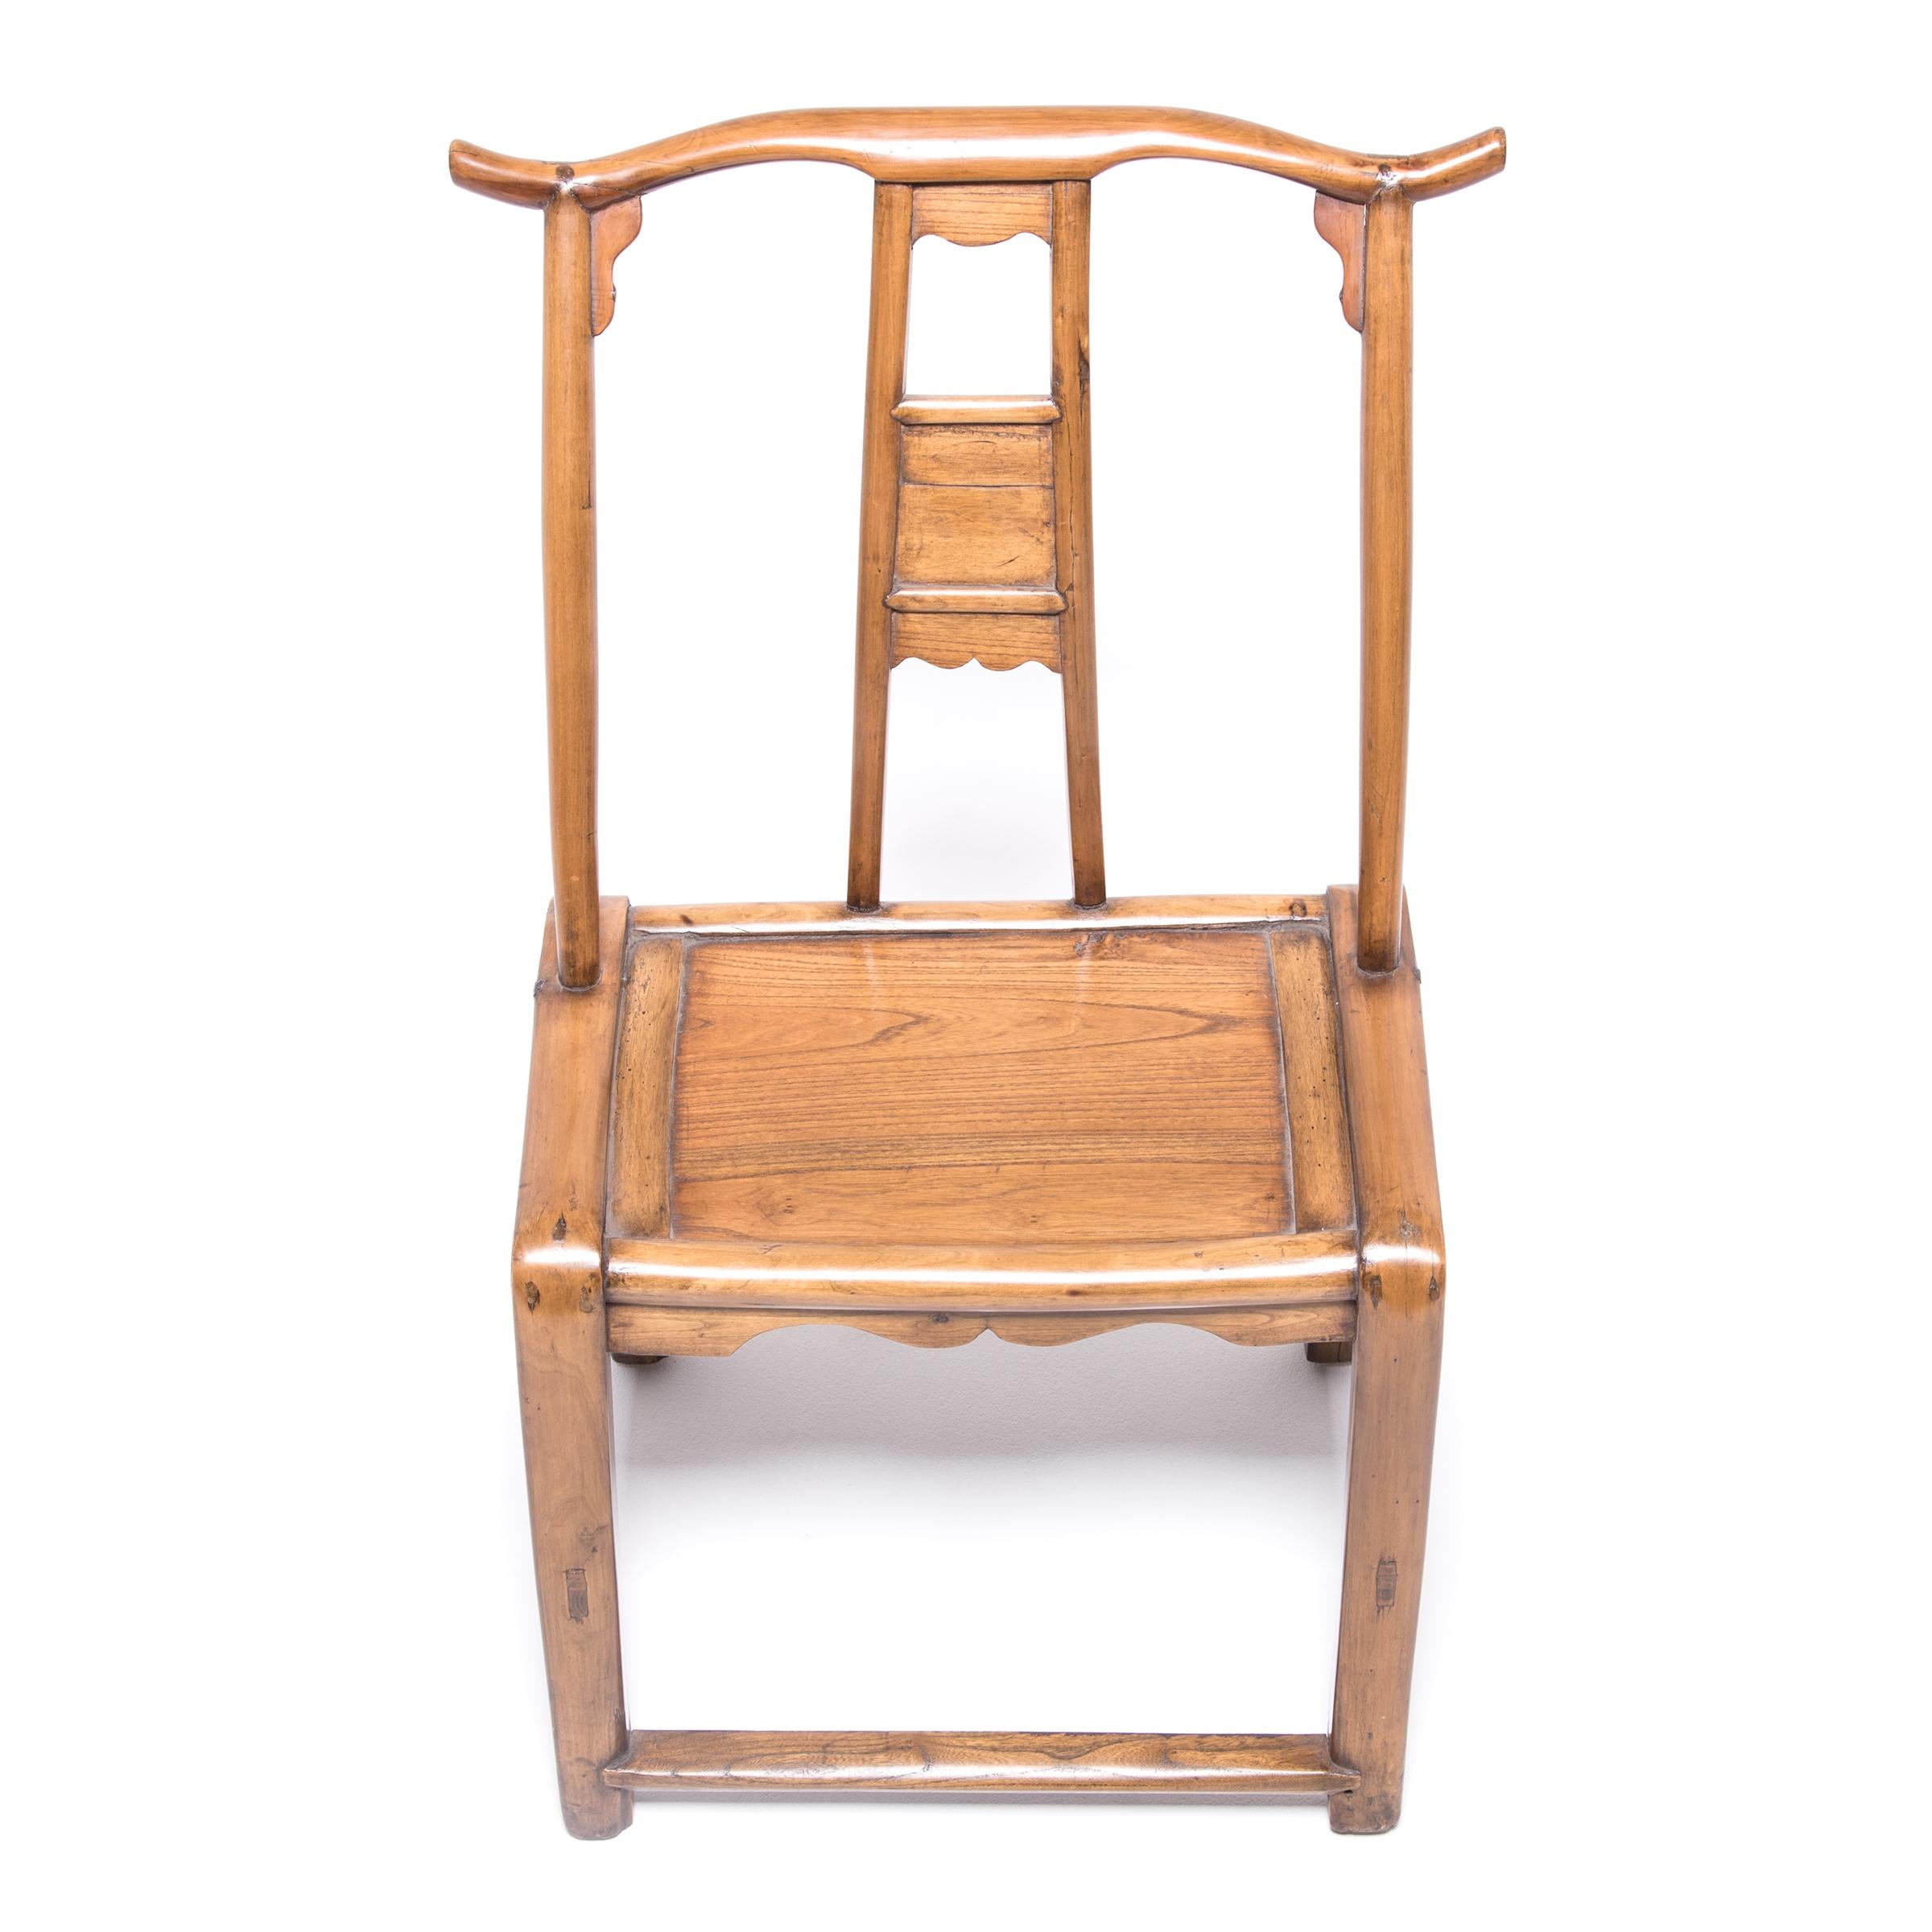 Pair of Chinese Provincial Bentform Chairs, c. 1850 For Sale 8